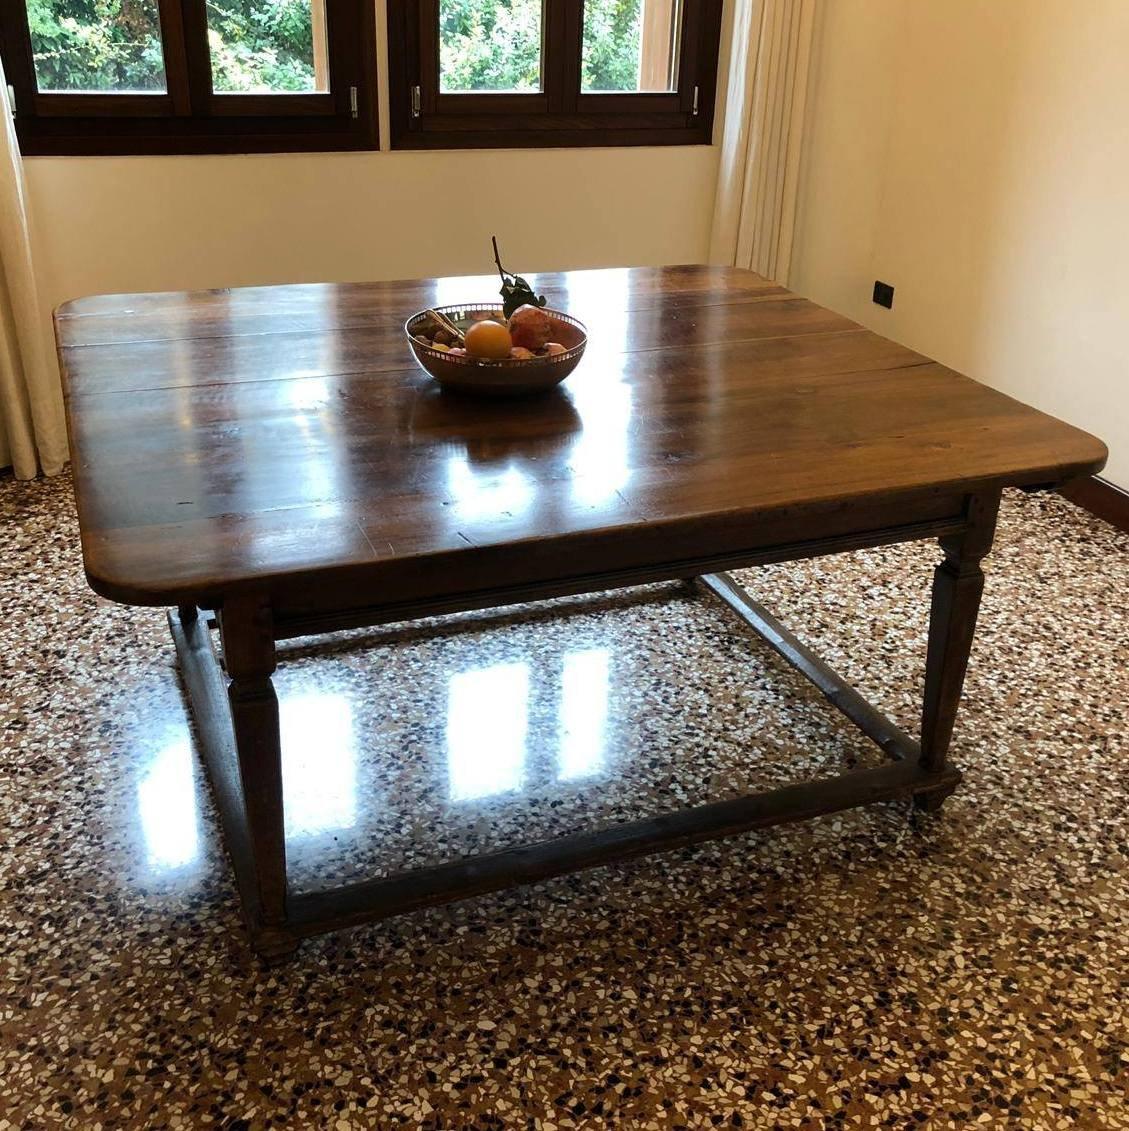 Large and antique solid poplar wood and solid walnut dining table, an interesting Italian work dating approximately to the 18th century.
Origin: Italy, Italian cabinetmaking, city of Vicenza

In good state of conservation, in patina.

A